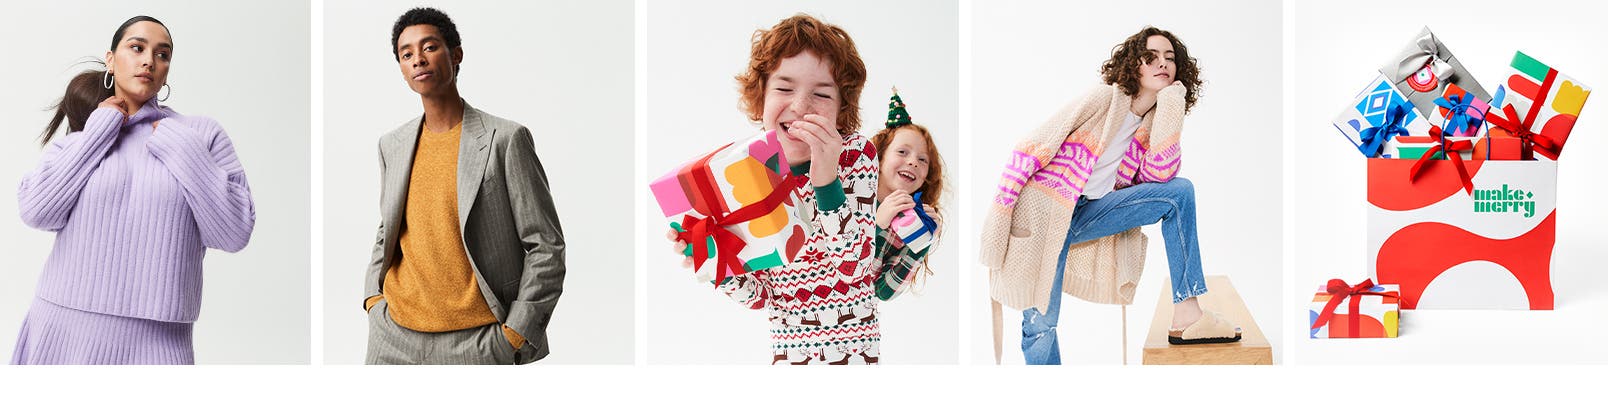 A woman wearing a knit set, a man in a sweater and suit, two children holding wrapped holiday gifts, a young woman in a knit cardigan and jeans, and a holiday gift bag filled with wrapped presents.